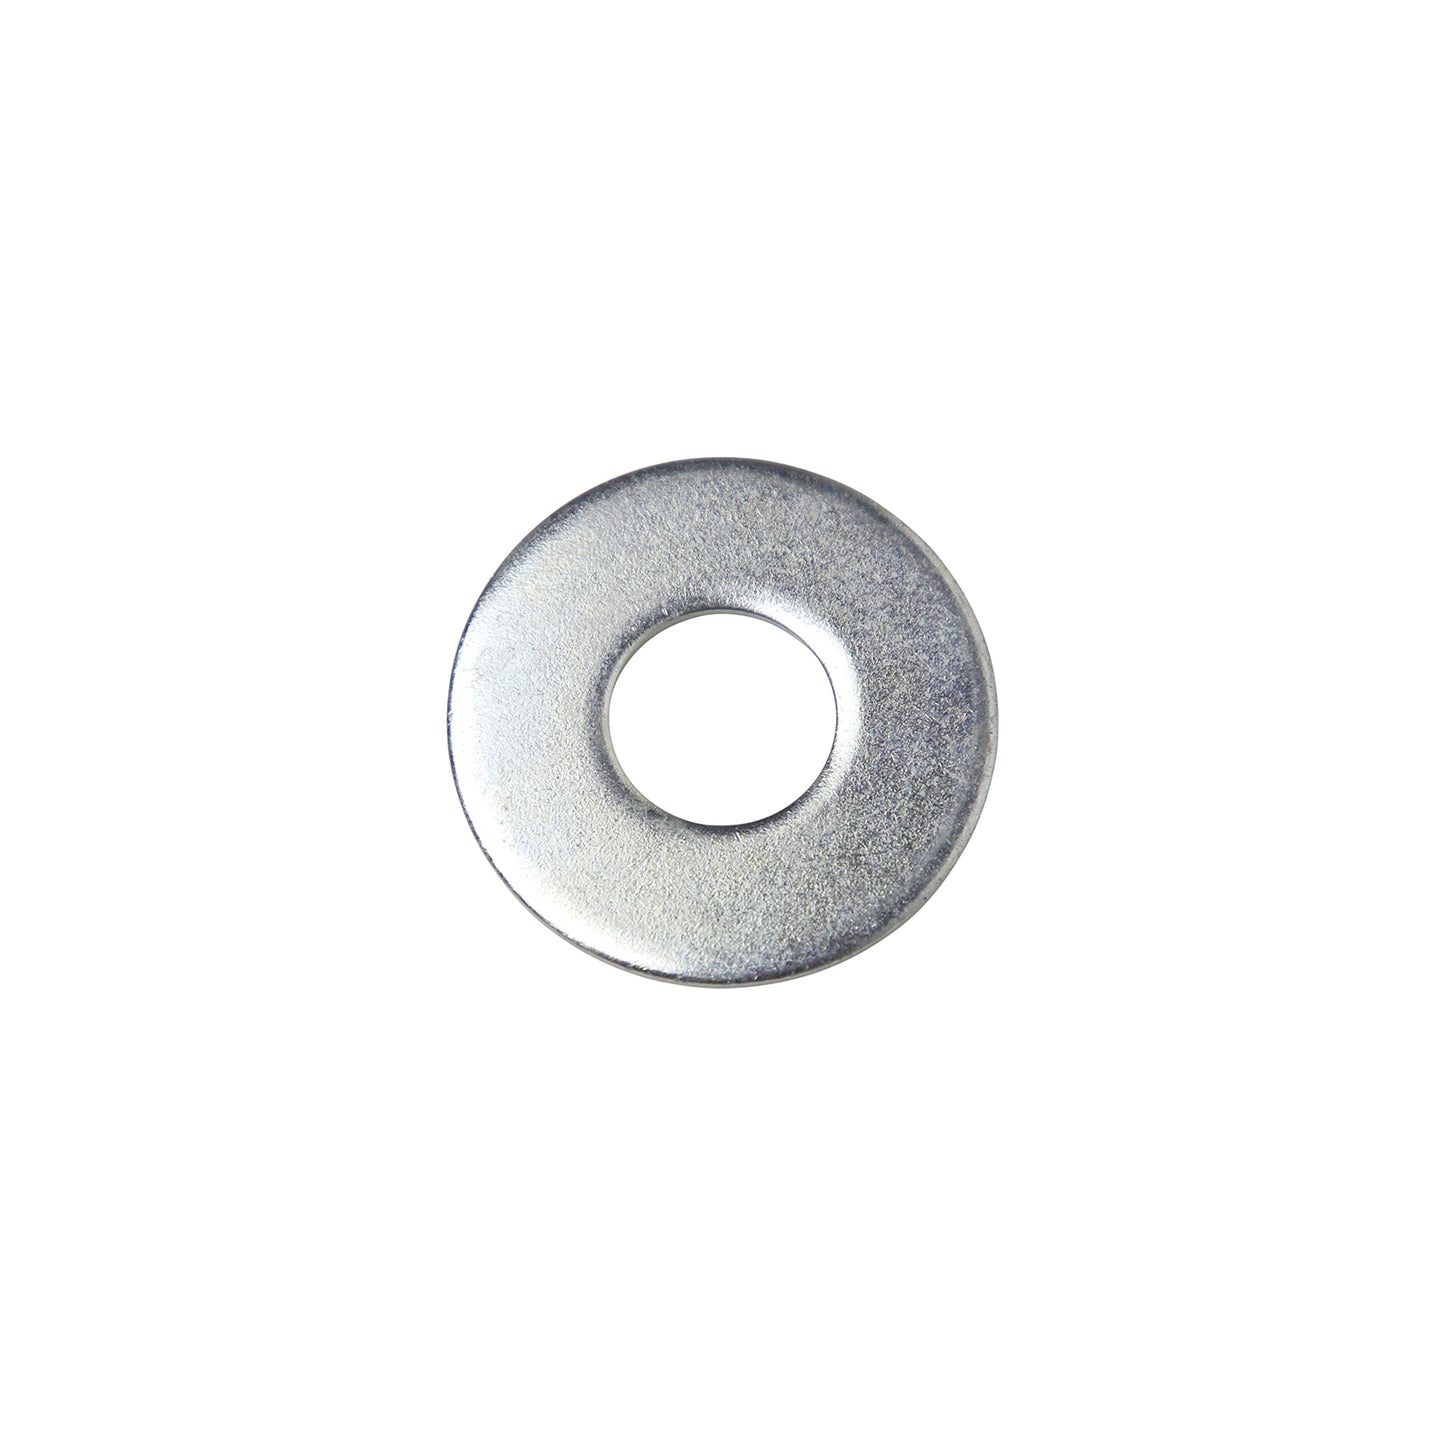 5/8" Conquest USS Flat Washer - Zinc Plated